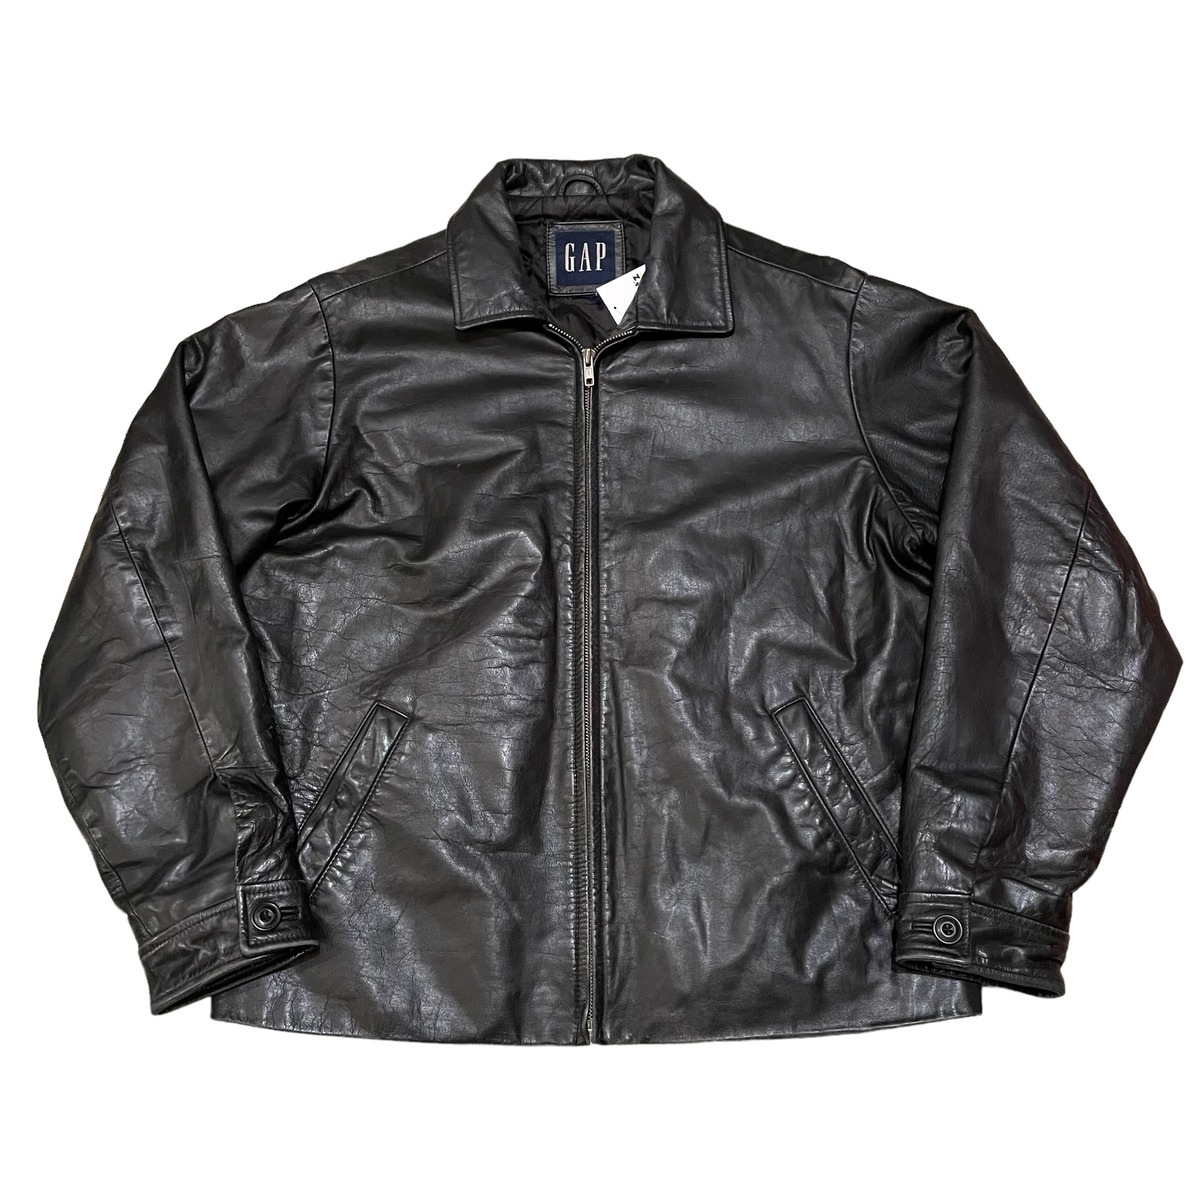 00s GAP zip leather jacket | What'z up